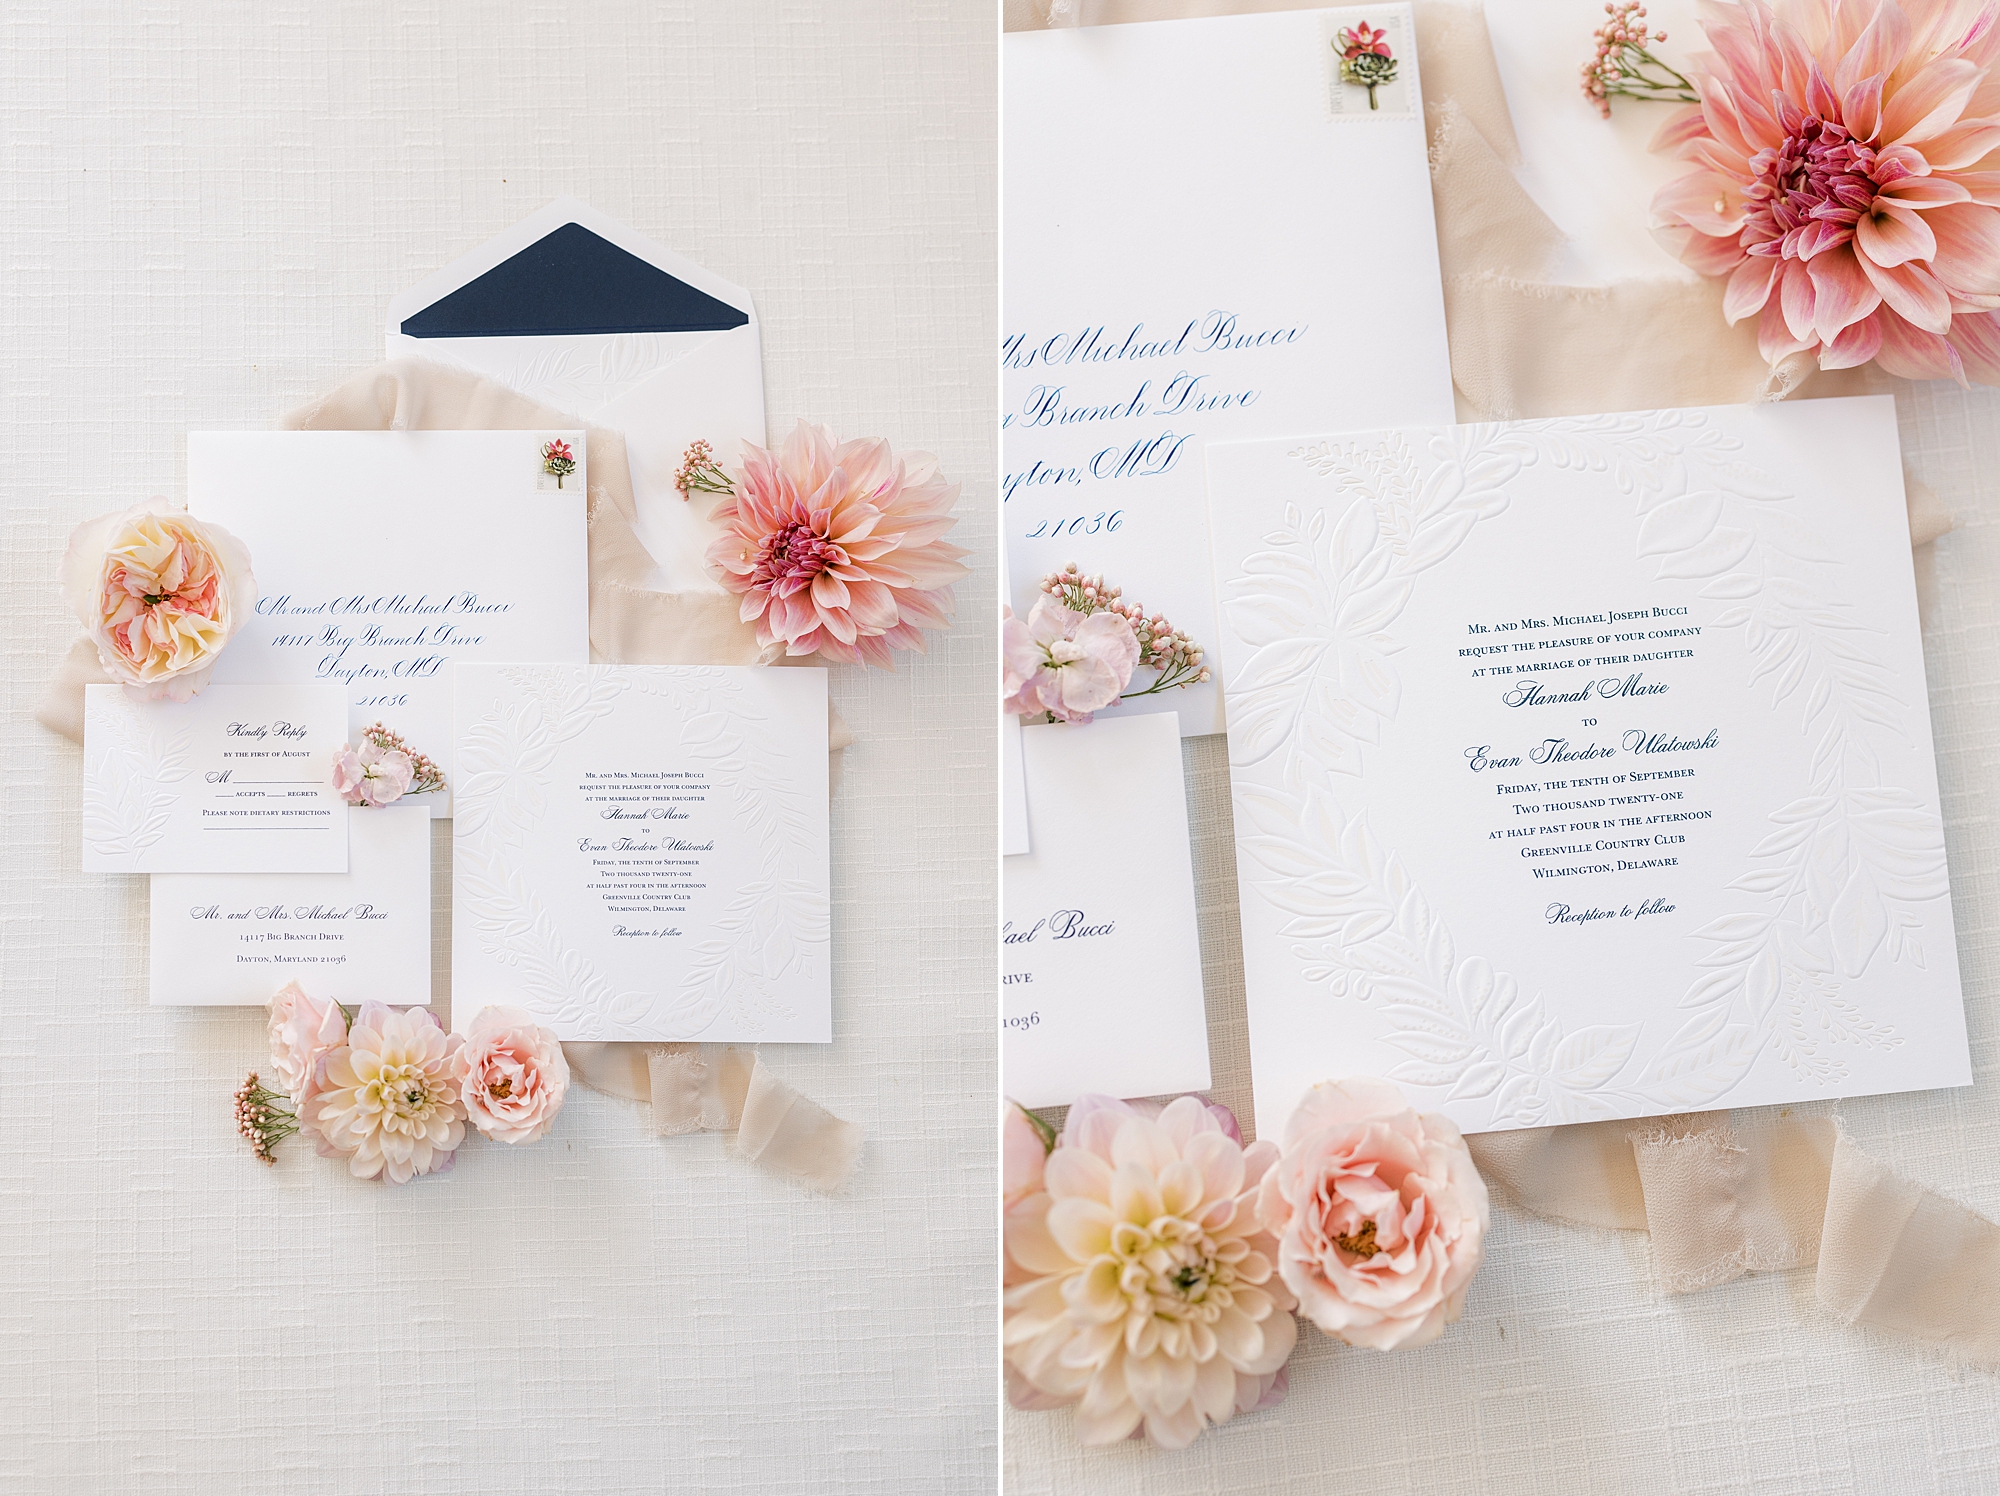 stationery with navy inner envelope and peach flowers